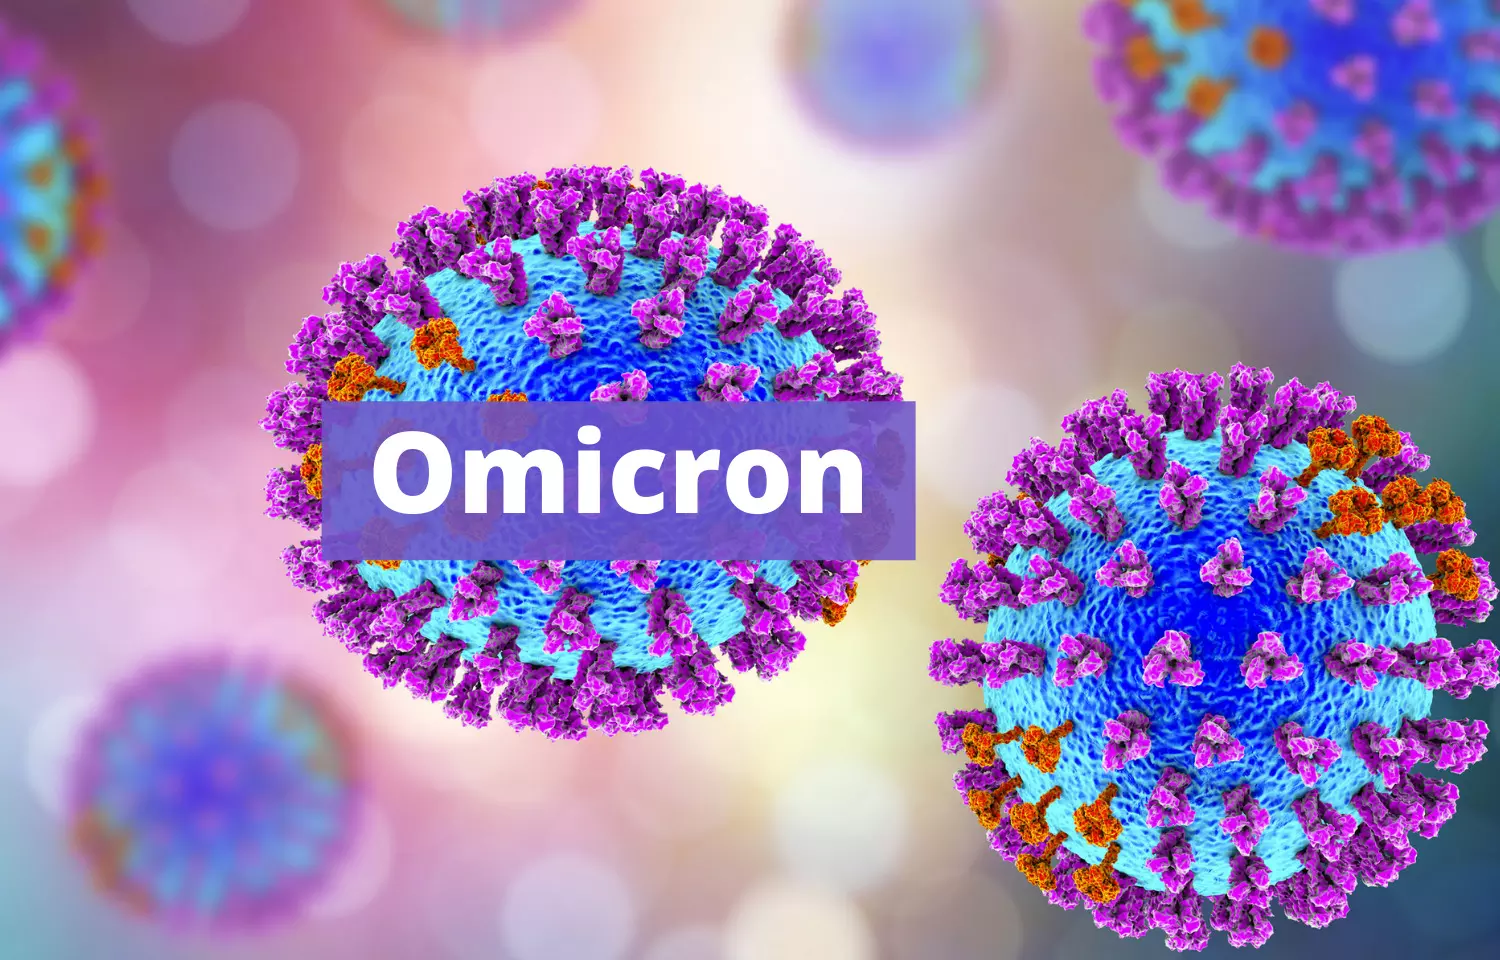 8 more Omicron cases found in Maharashtra, tally rise to 40